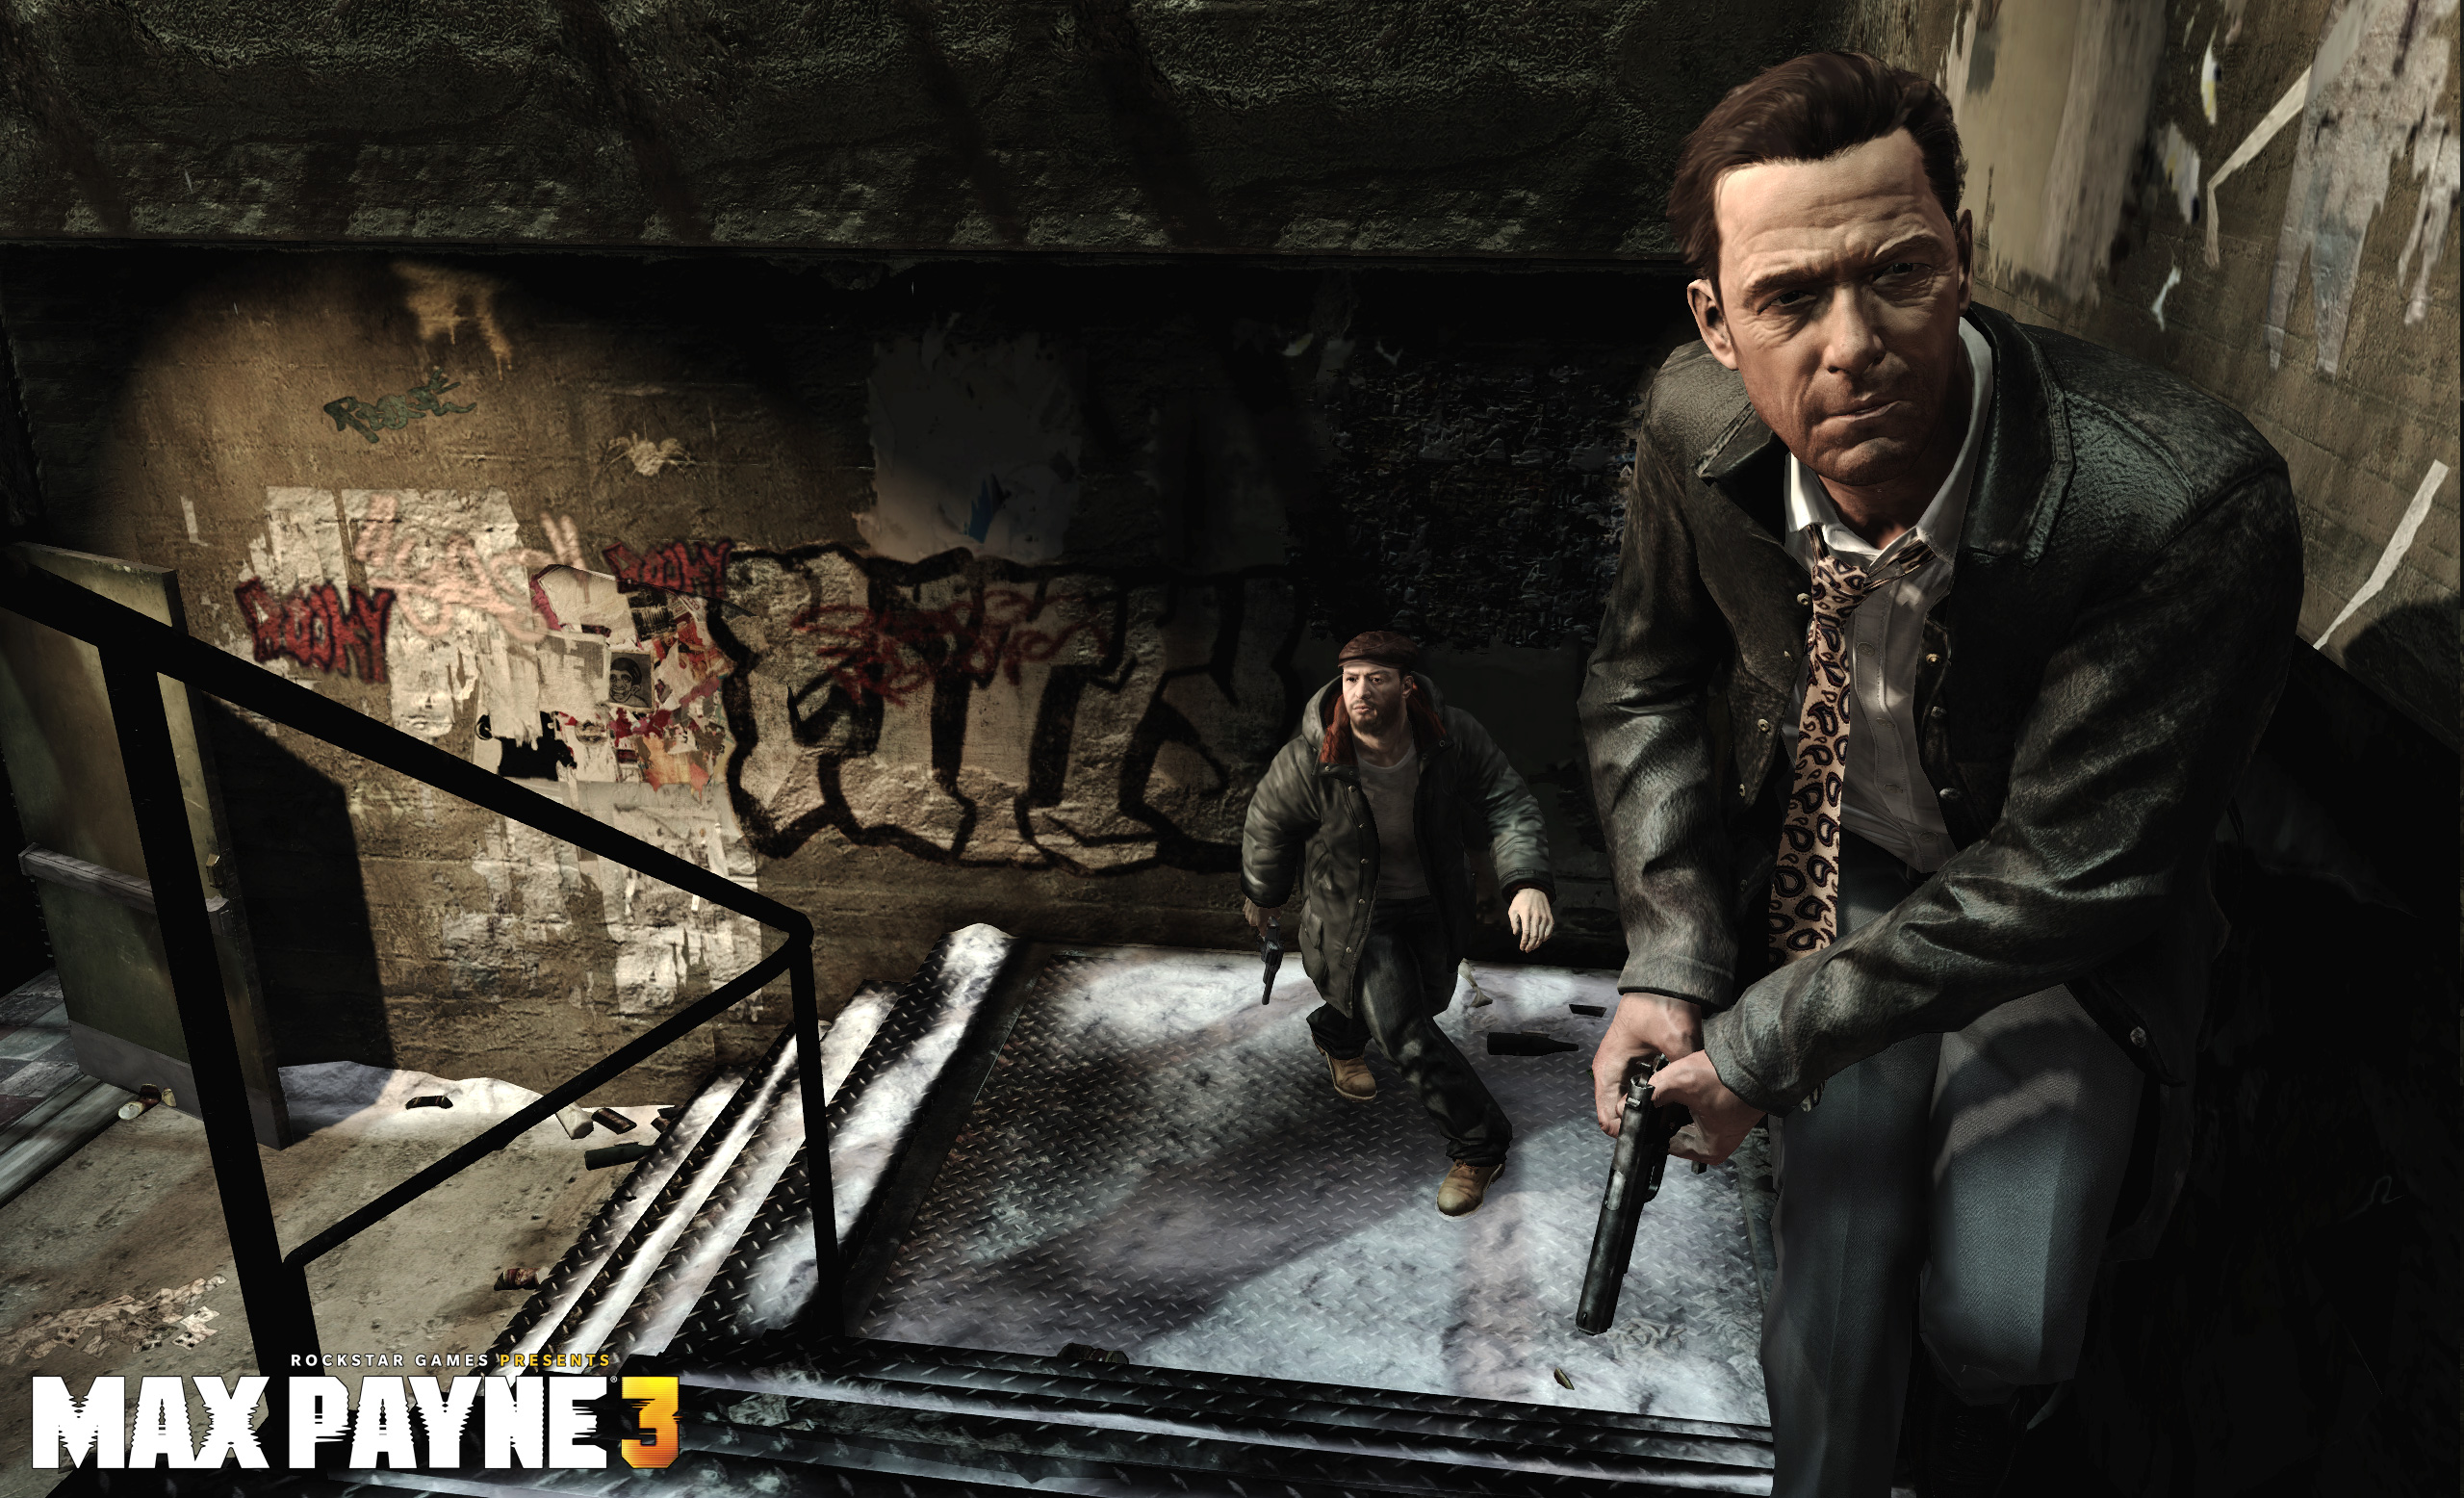 Max Payne 3 Pics, Video Game Collection